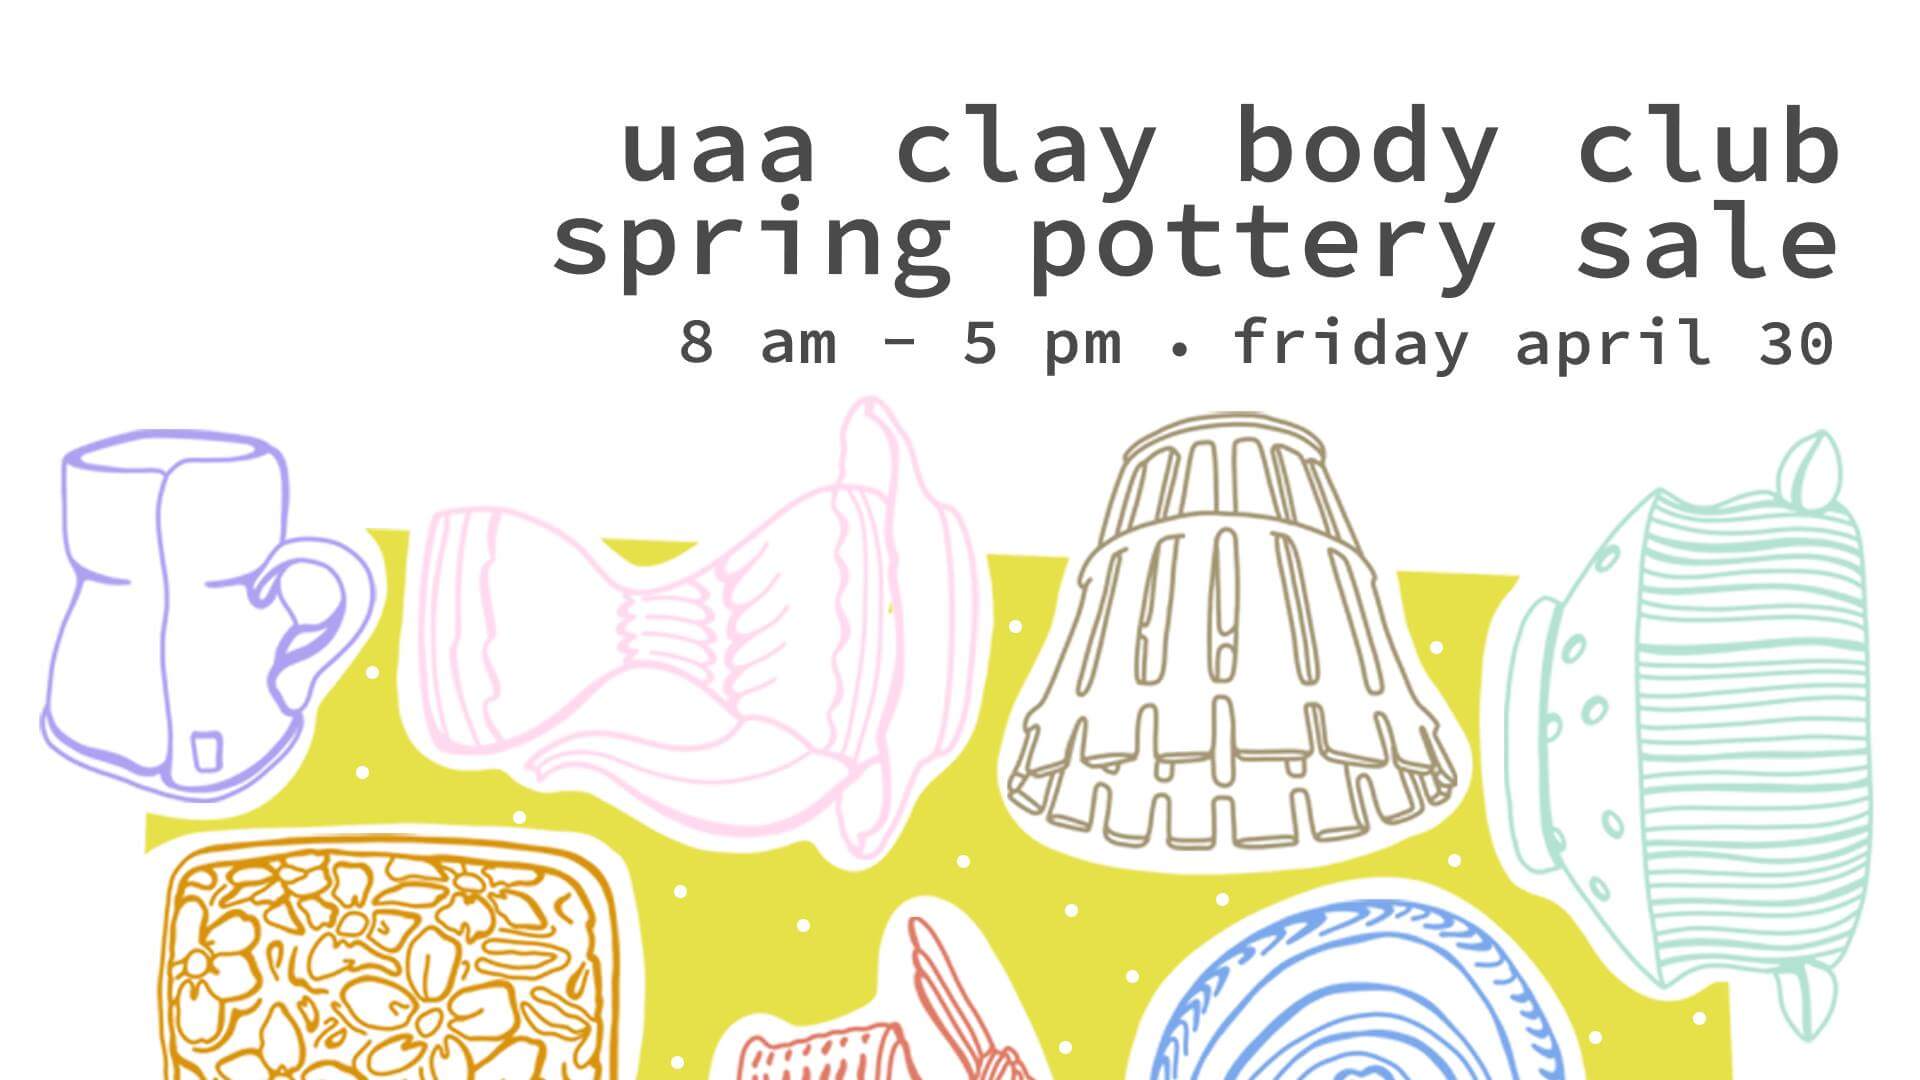 UAA Clay Body Club Spring Pottery Sale on Friday, April 30, 2021, from 8 a.m. to 5 p.m.